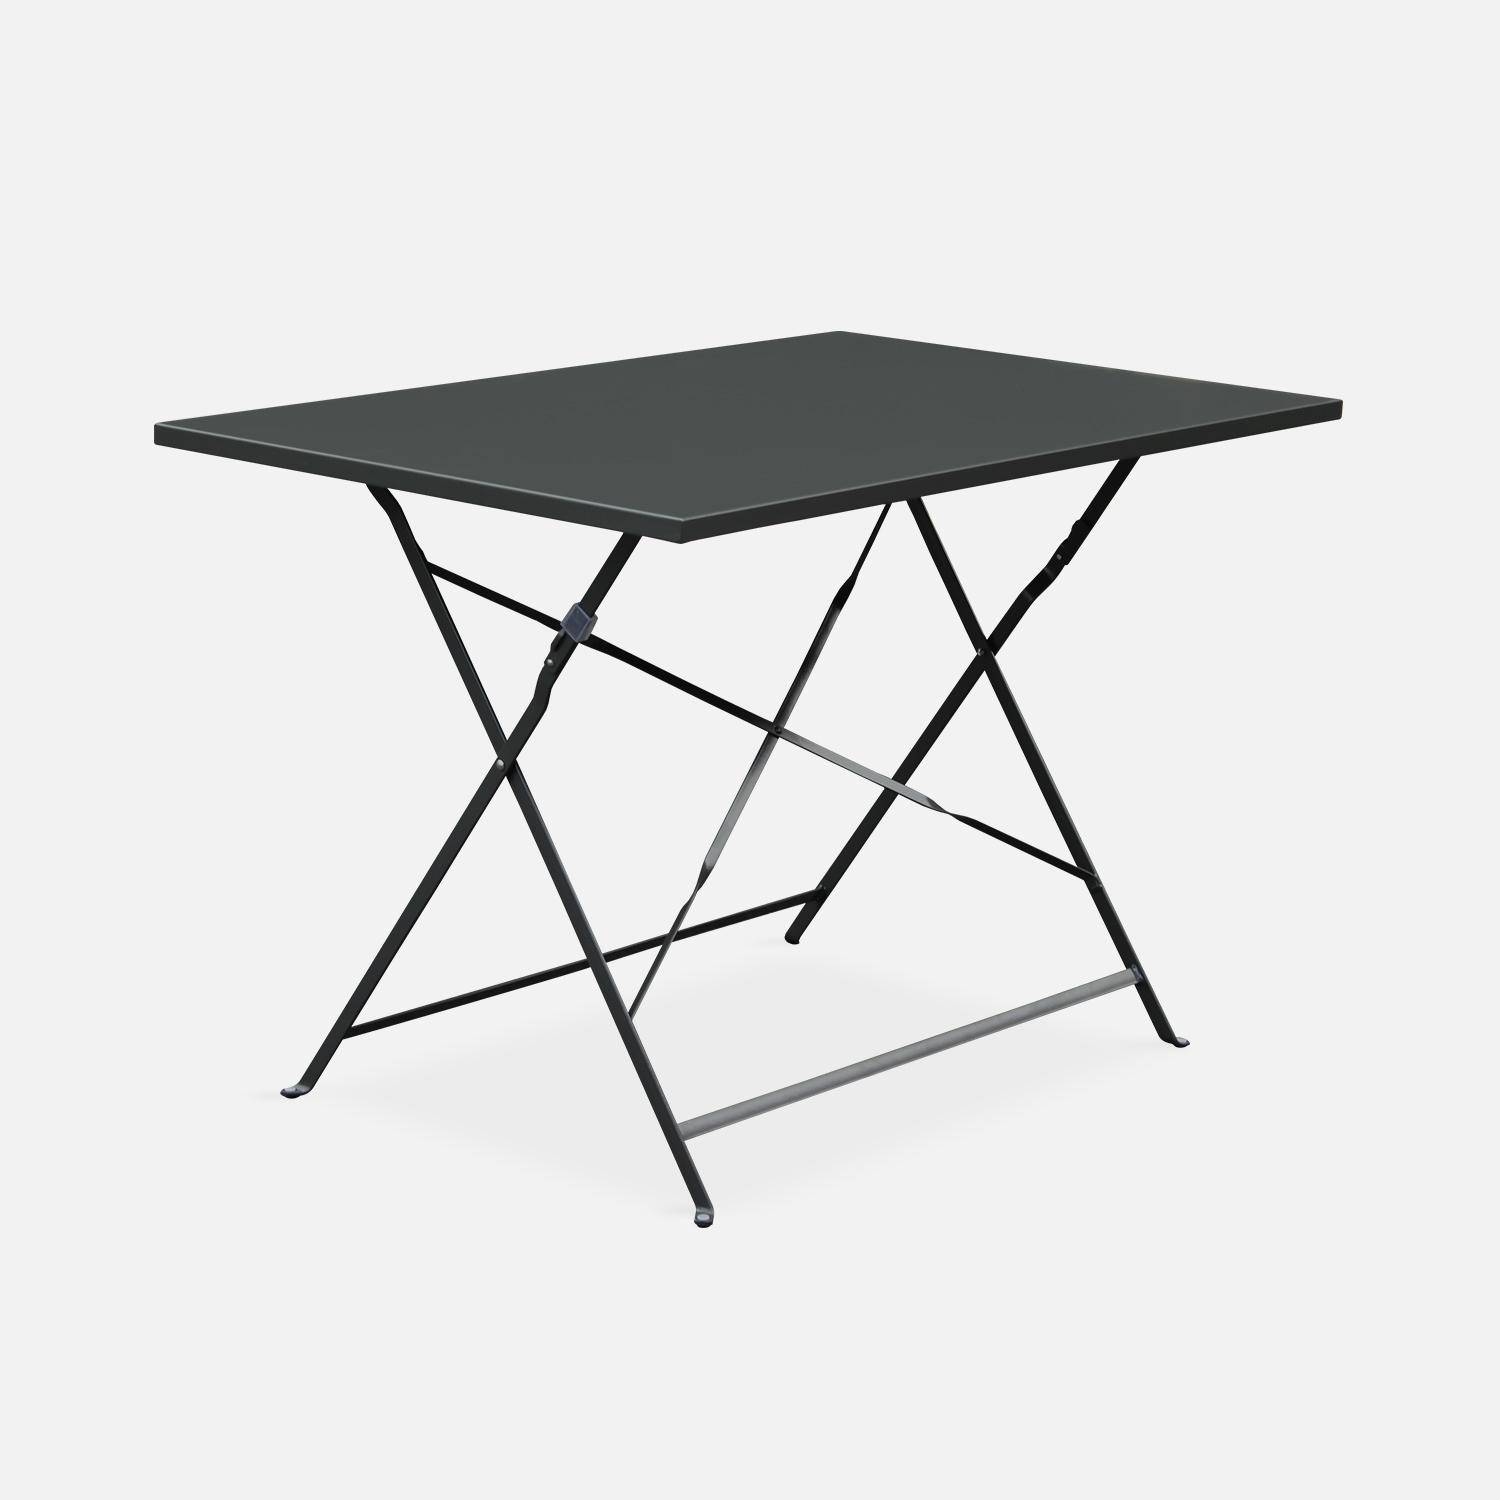 4-seater foldable thermo-lacquered steel bistro garden table with chairs, 110x70cm - Emilia - Anthracite Photo4